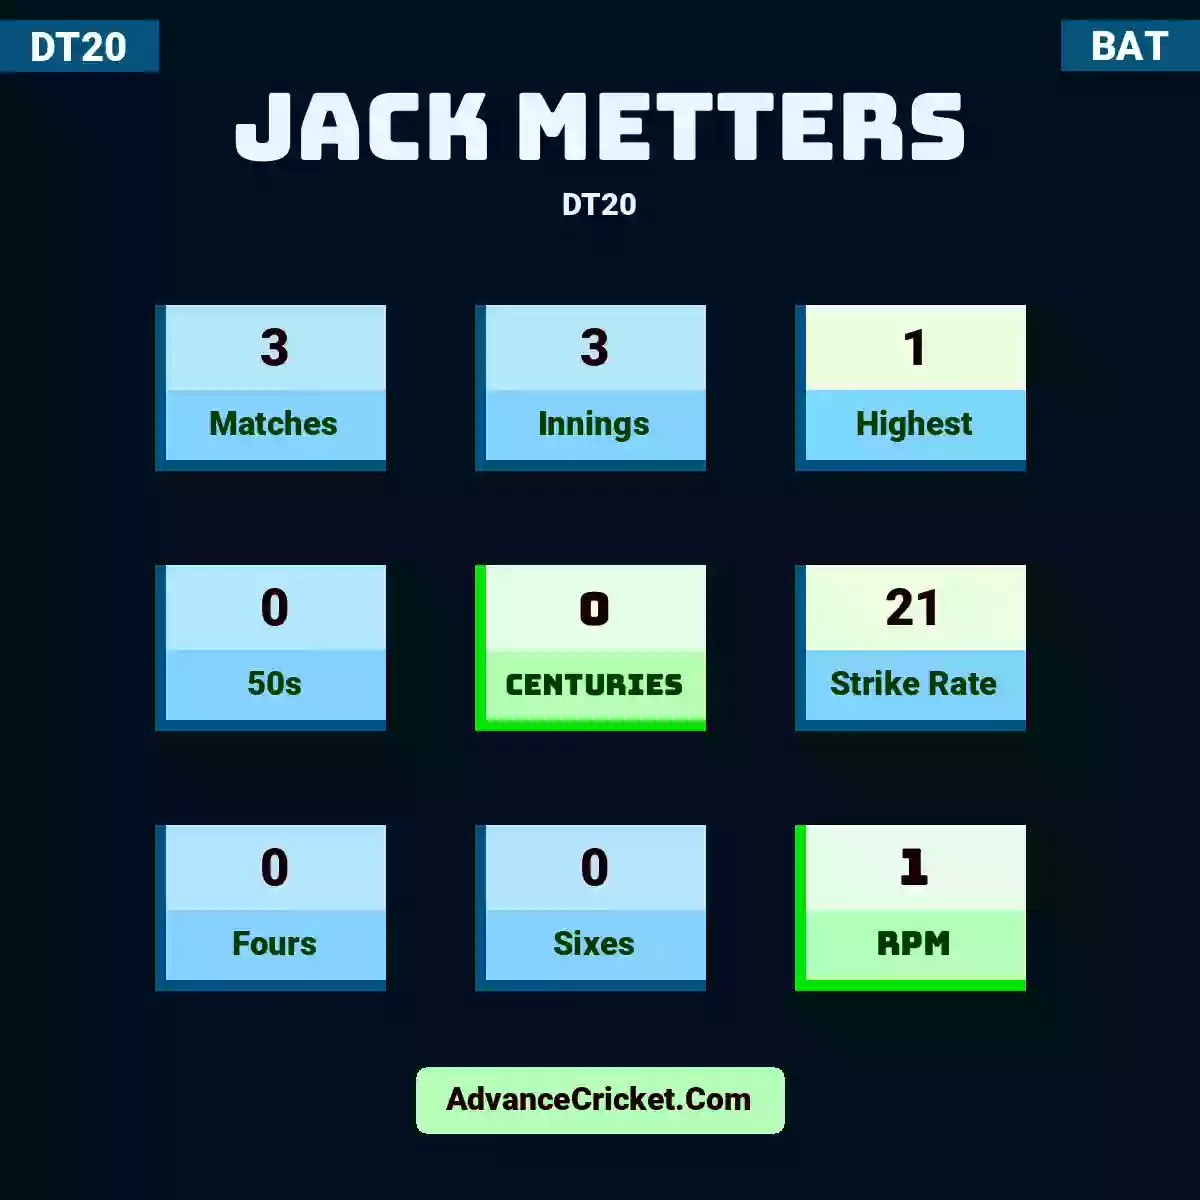 Jack Metters DT20 , Jack Metters played 3 matches, scored 1 runs as highest, 0 half-centuries, and 0 centuries, with a strike rate of 21. J.Metters hit 0 fours and 0 sixes, with an RPM of 1.